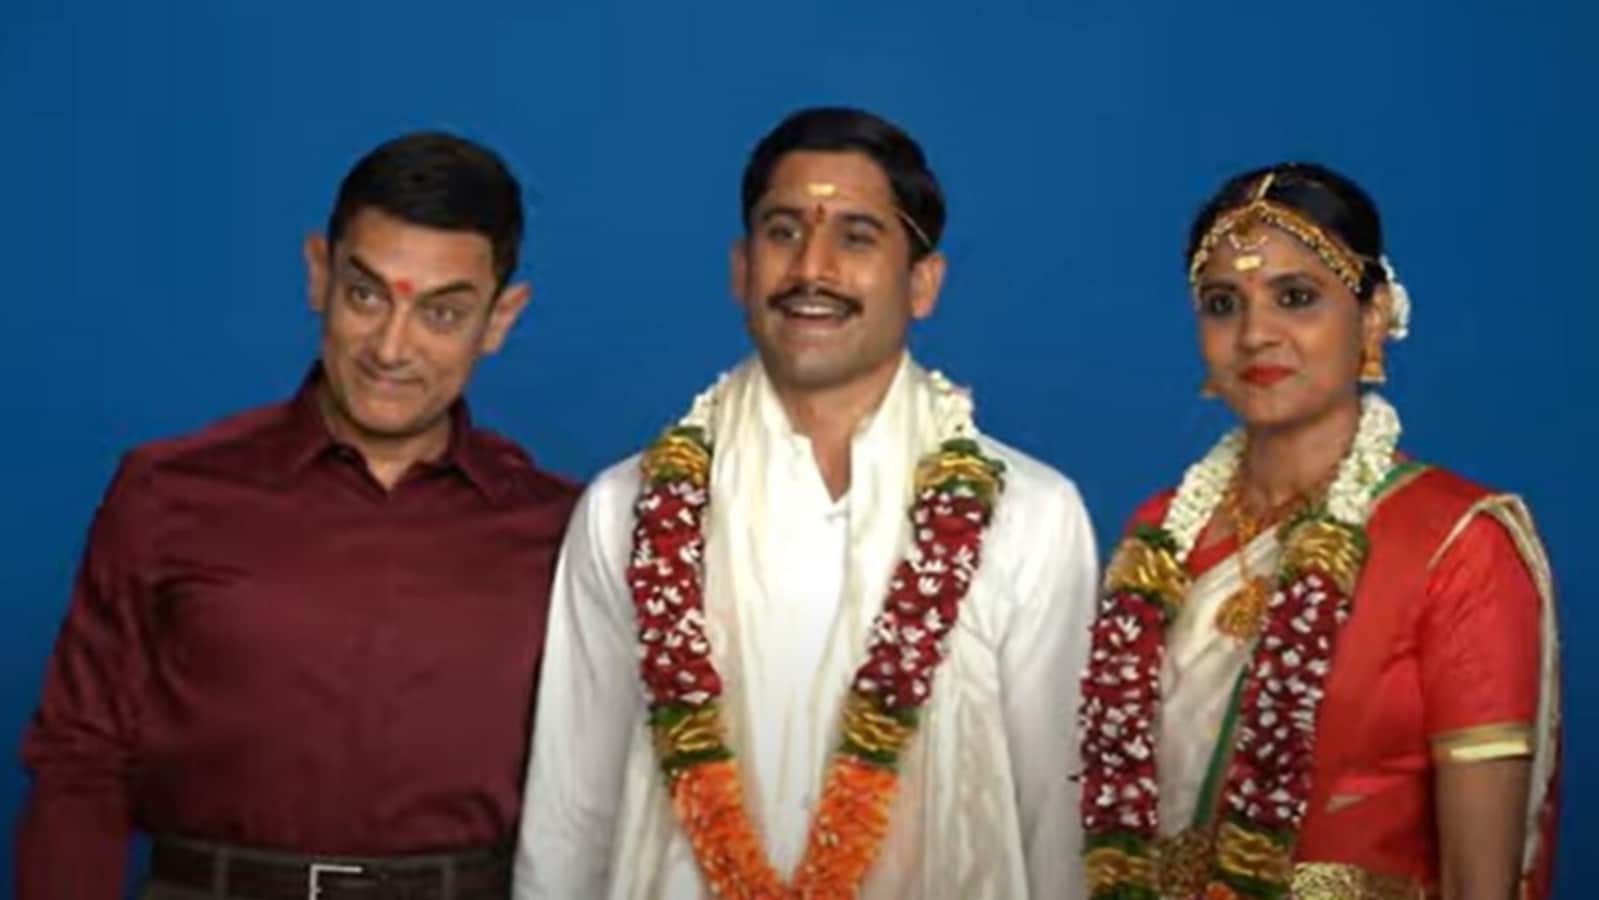 Aamir Khan says he called Naga Chaitanya’s parents to praise his upbringing. See BTS video from Laal Singh Chaddha